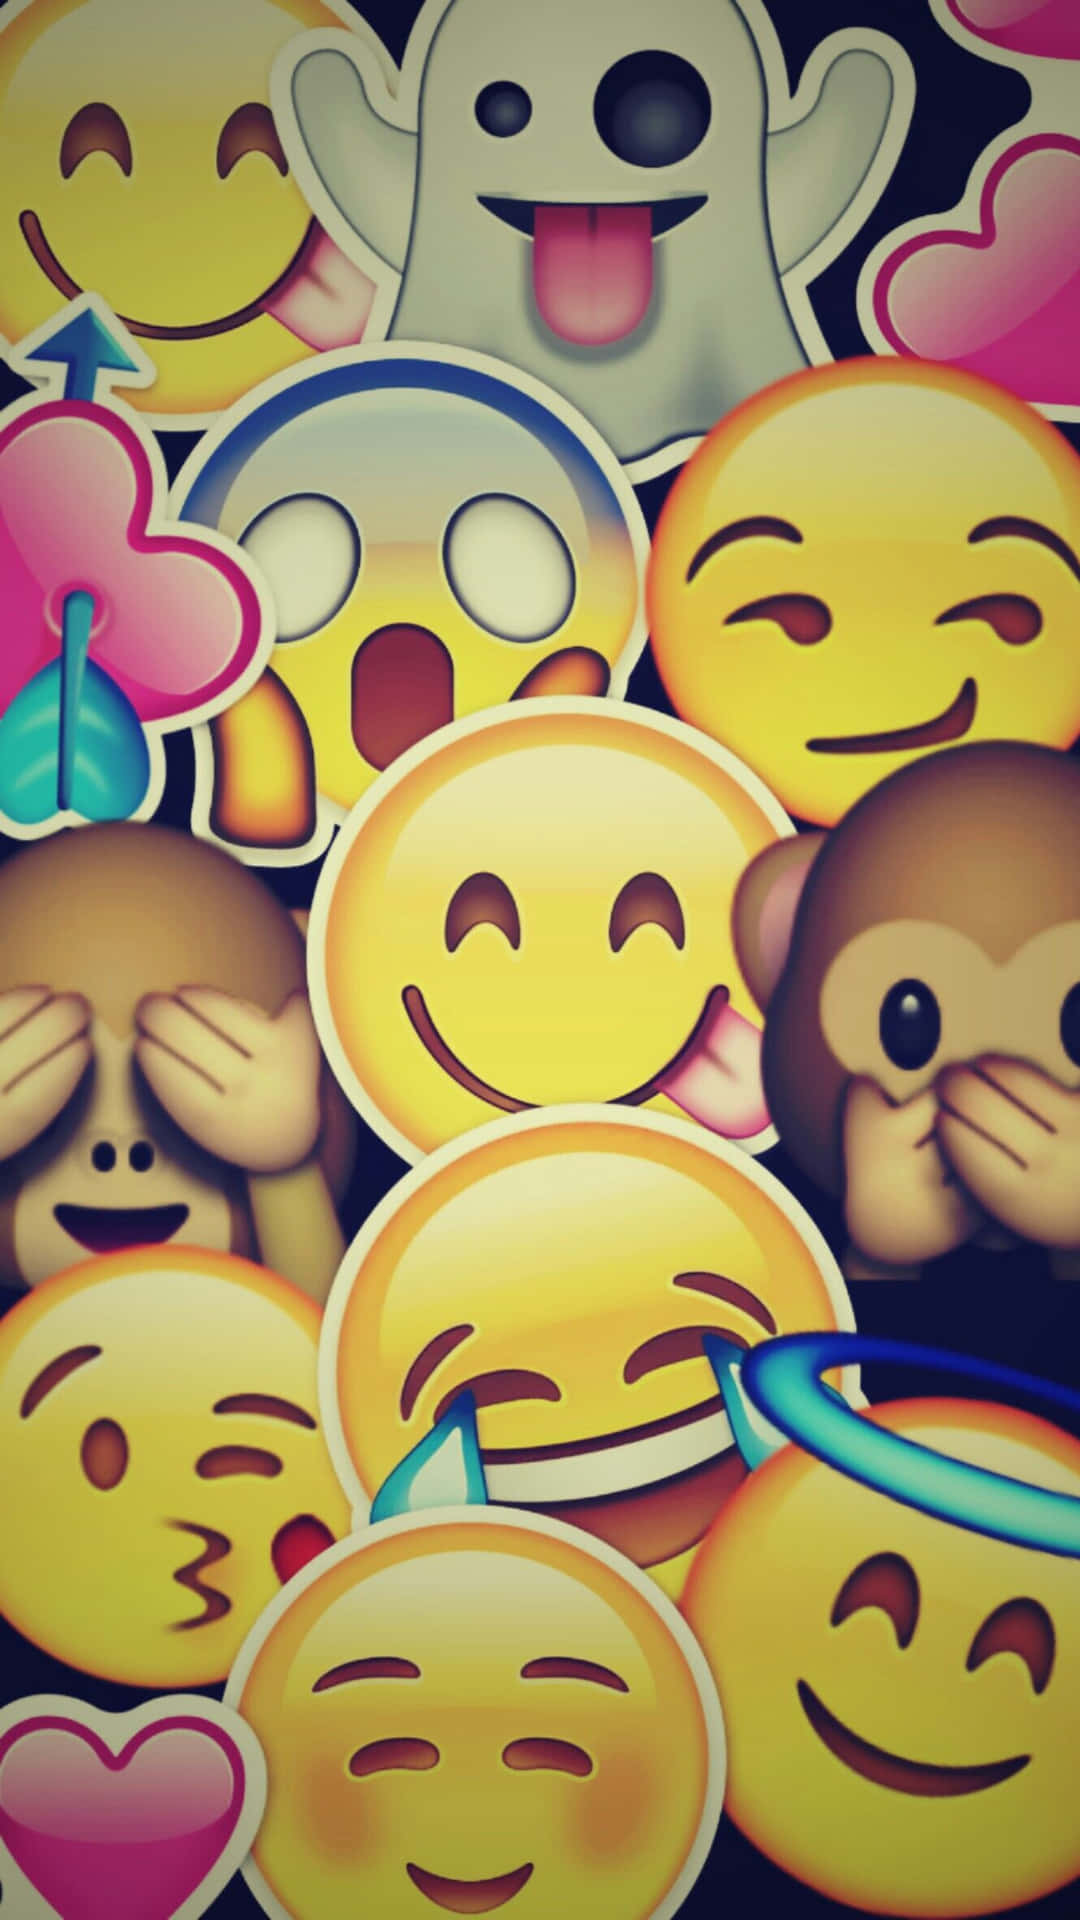 "Express Your Feelings with Cute Emojis!" Wallpaper